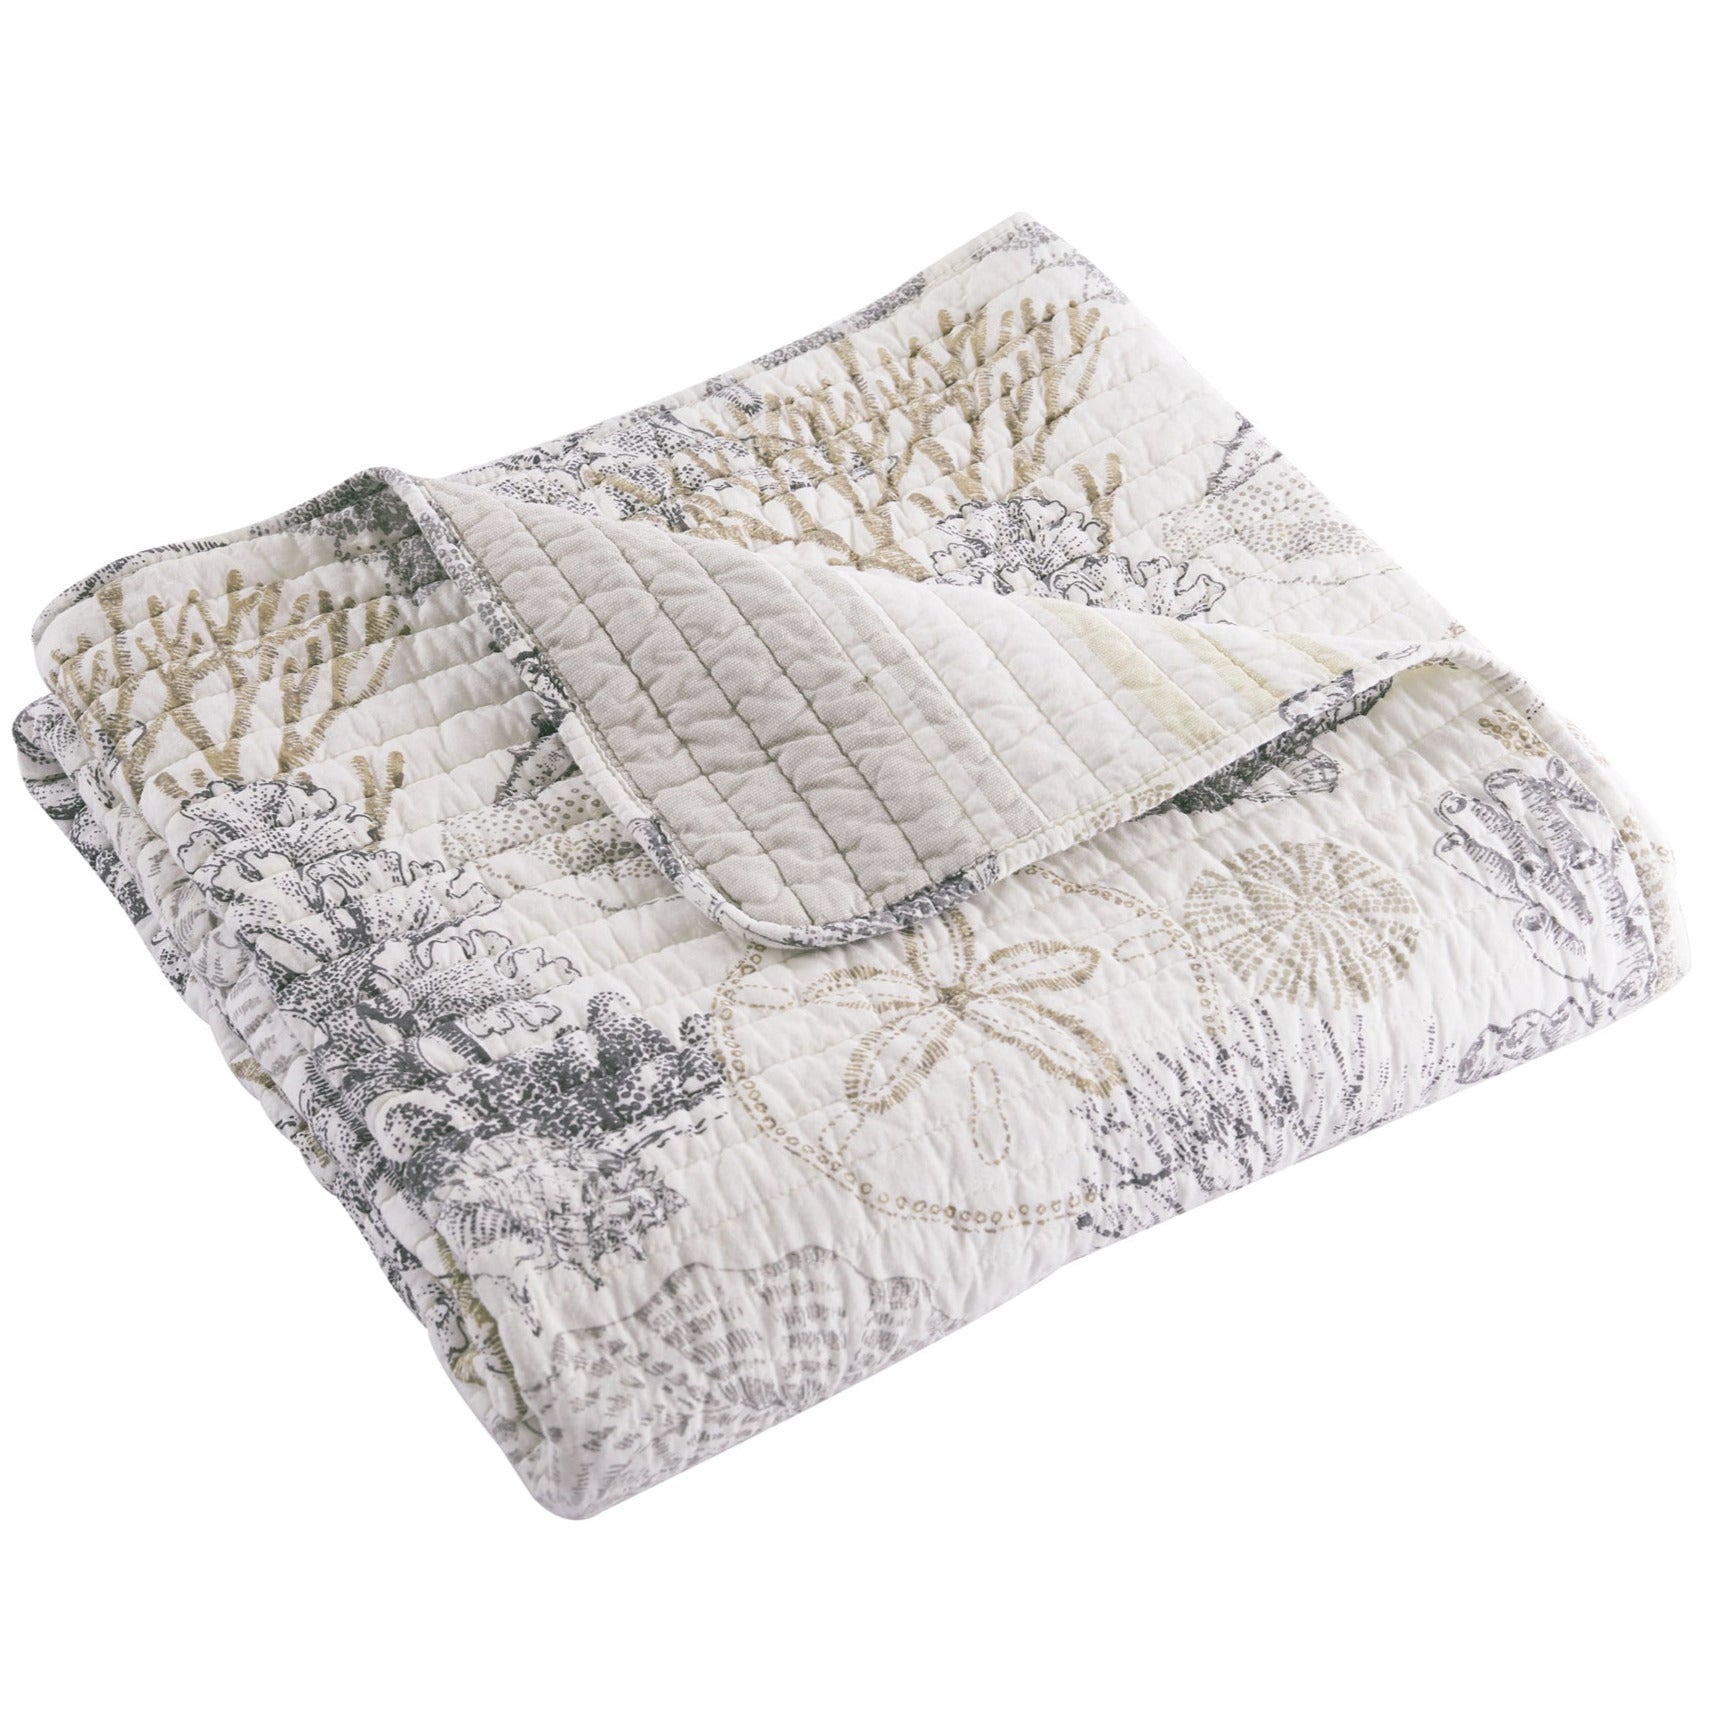 Caspian Sea Quilted Throw